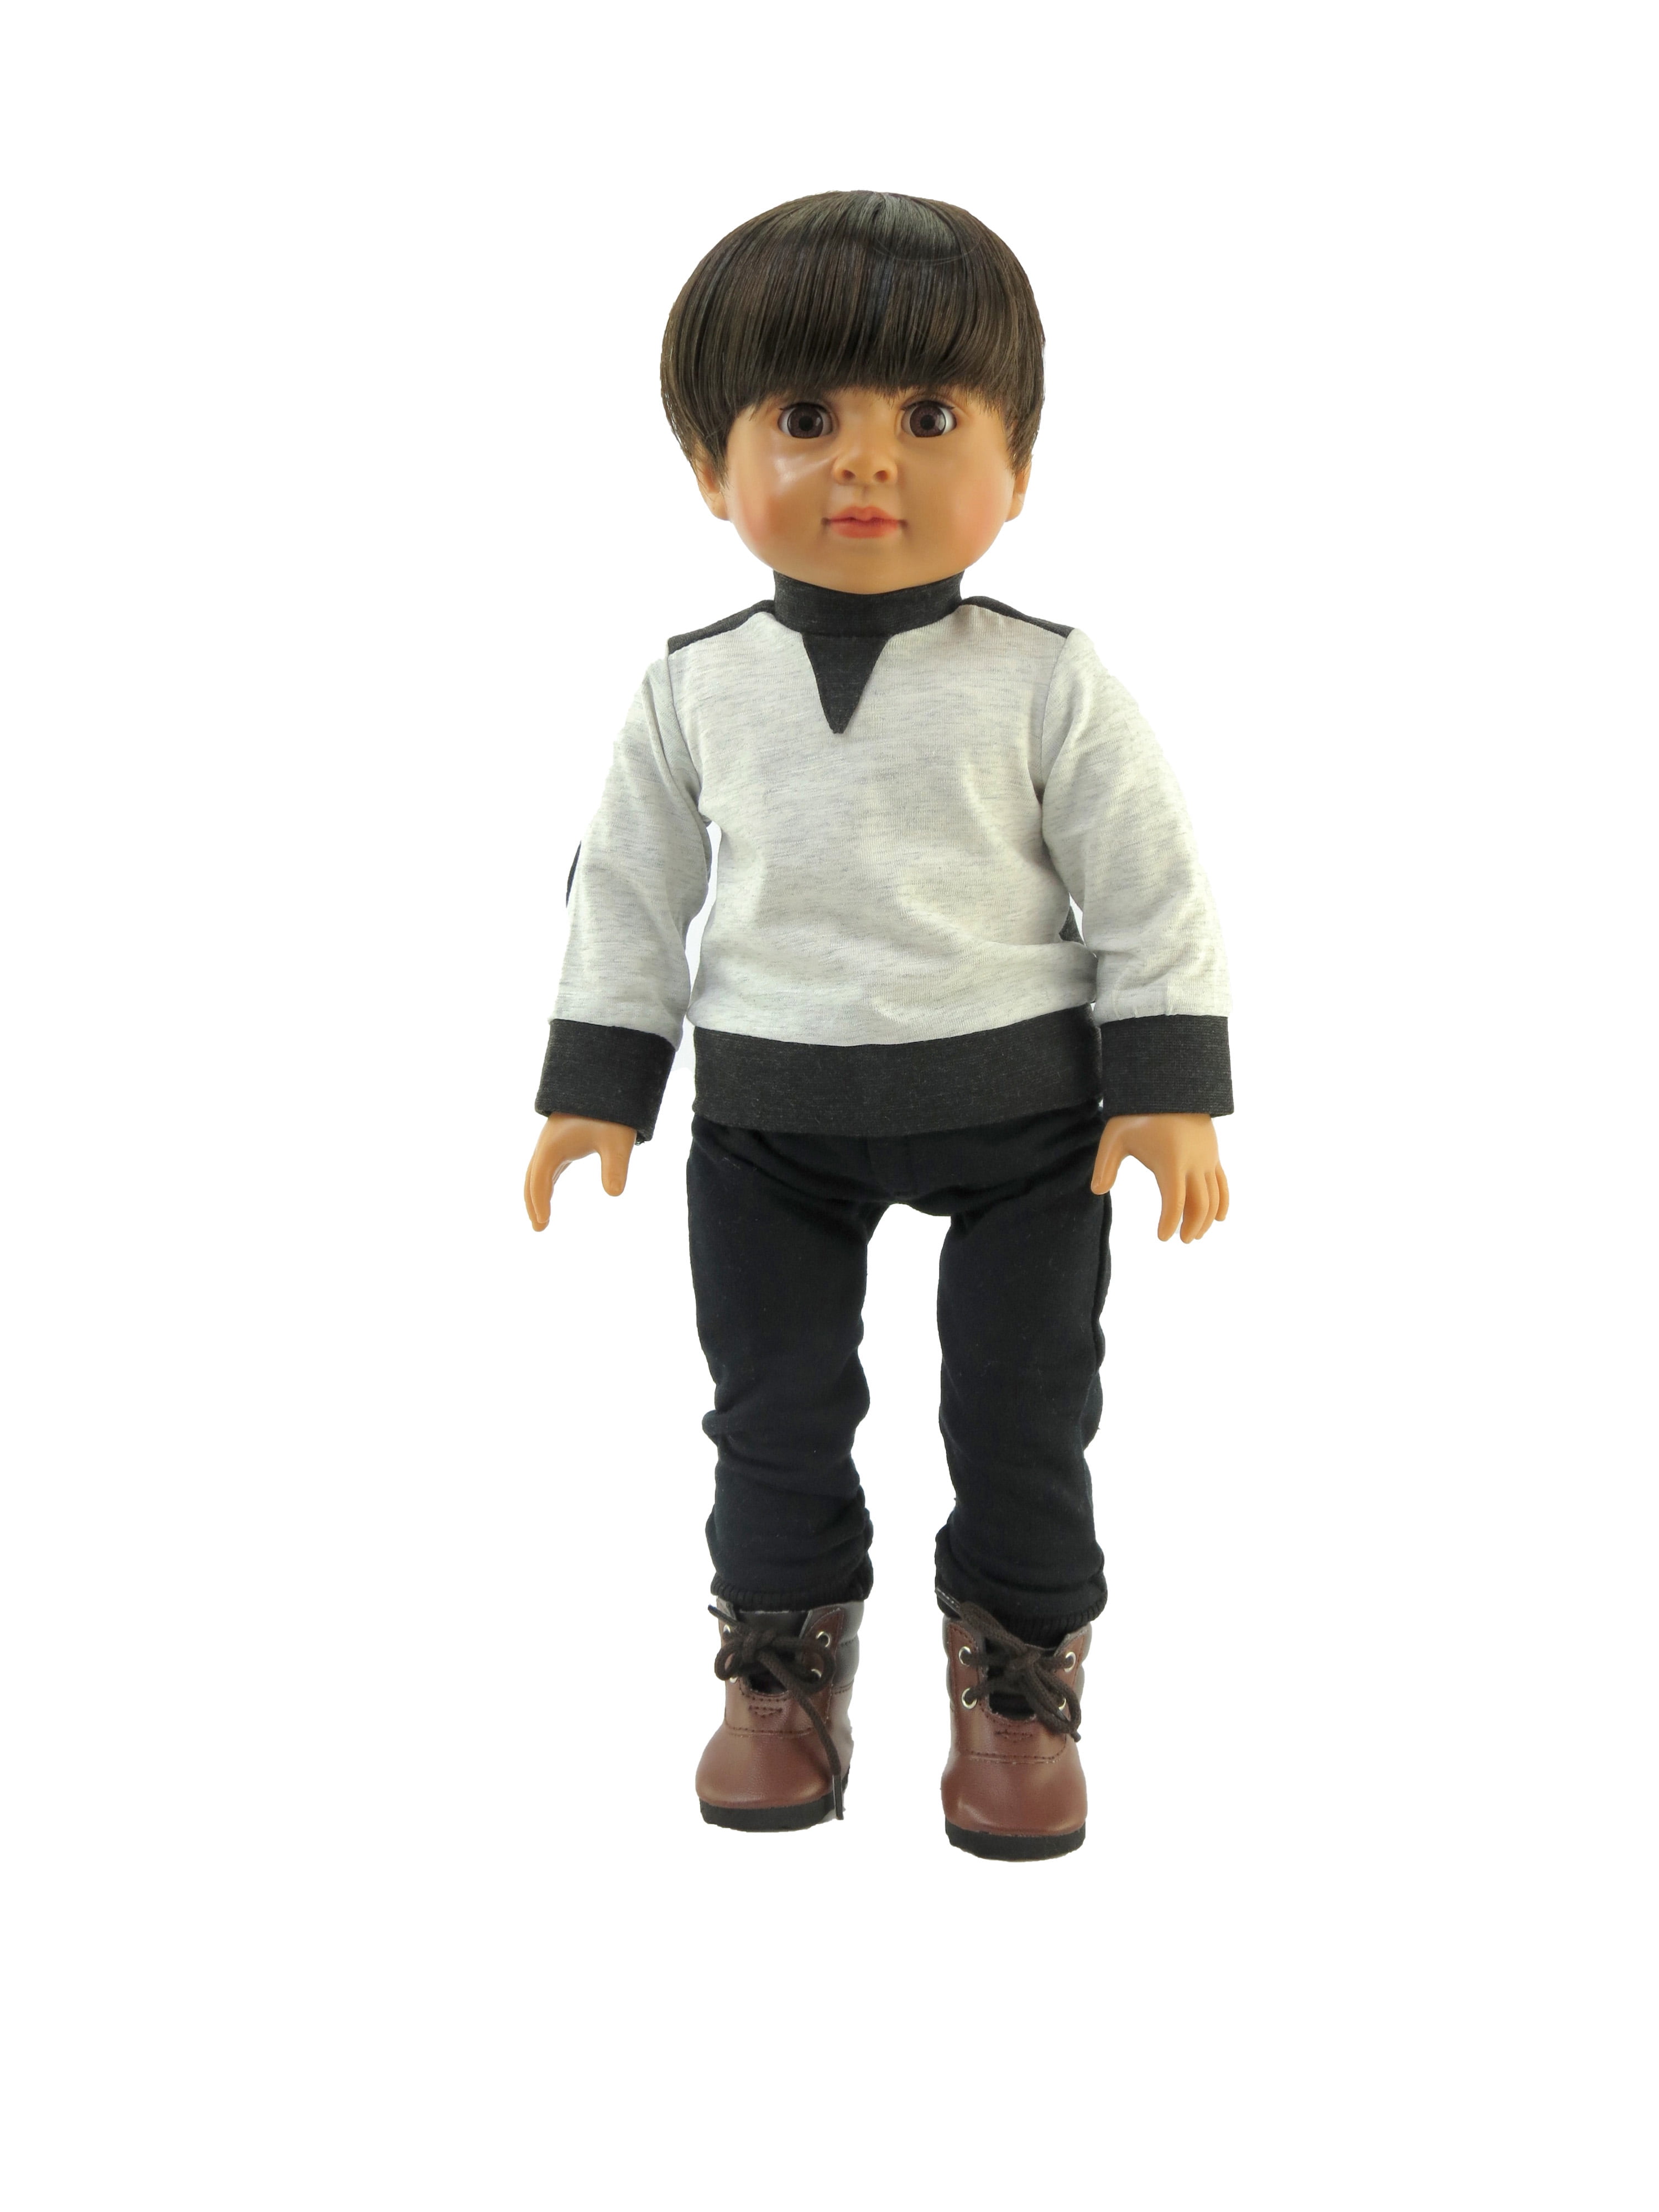 3 Piece Outfit for all 18 Boy Dolls 18 Boy Doll Clothes